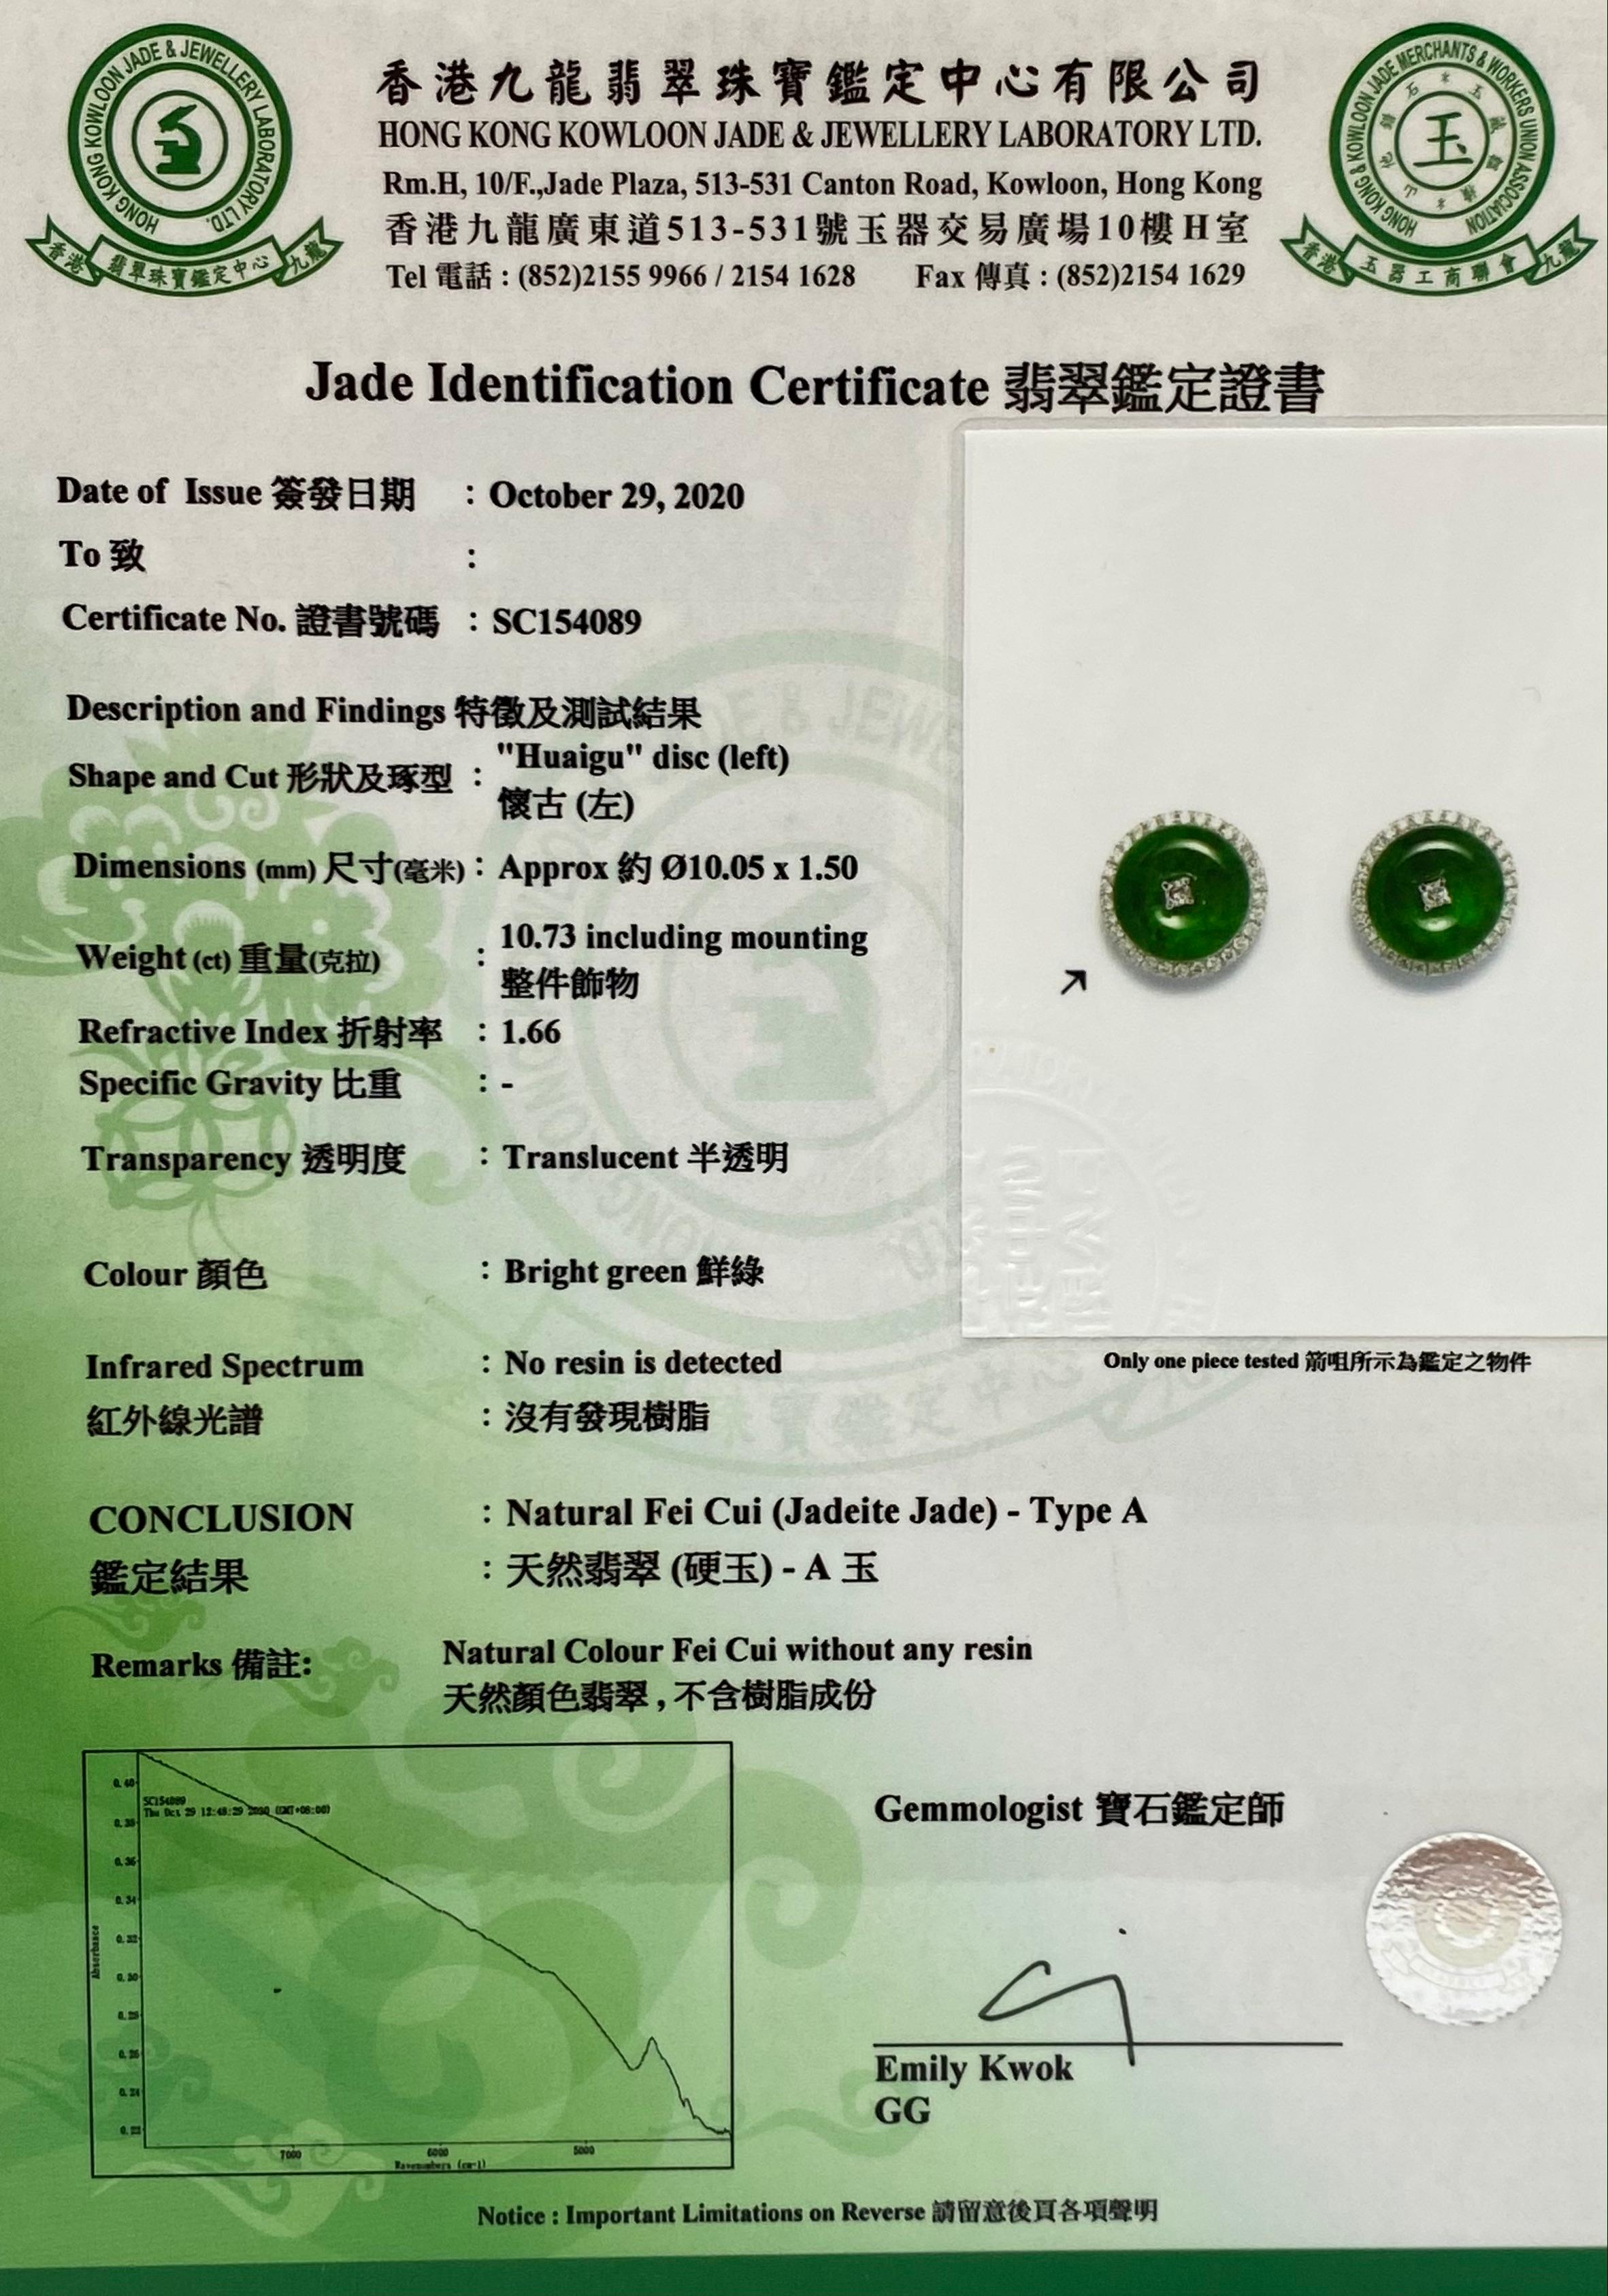 Certified Natural Type A Jadeite Jade and Diamond Earrings, Spinach Green Color 6